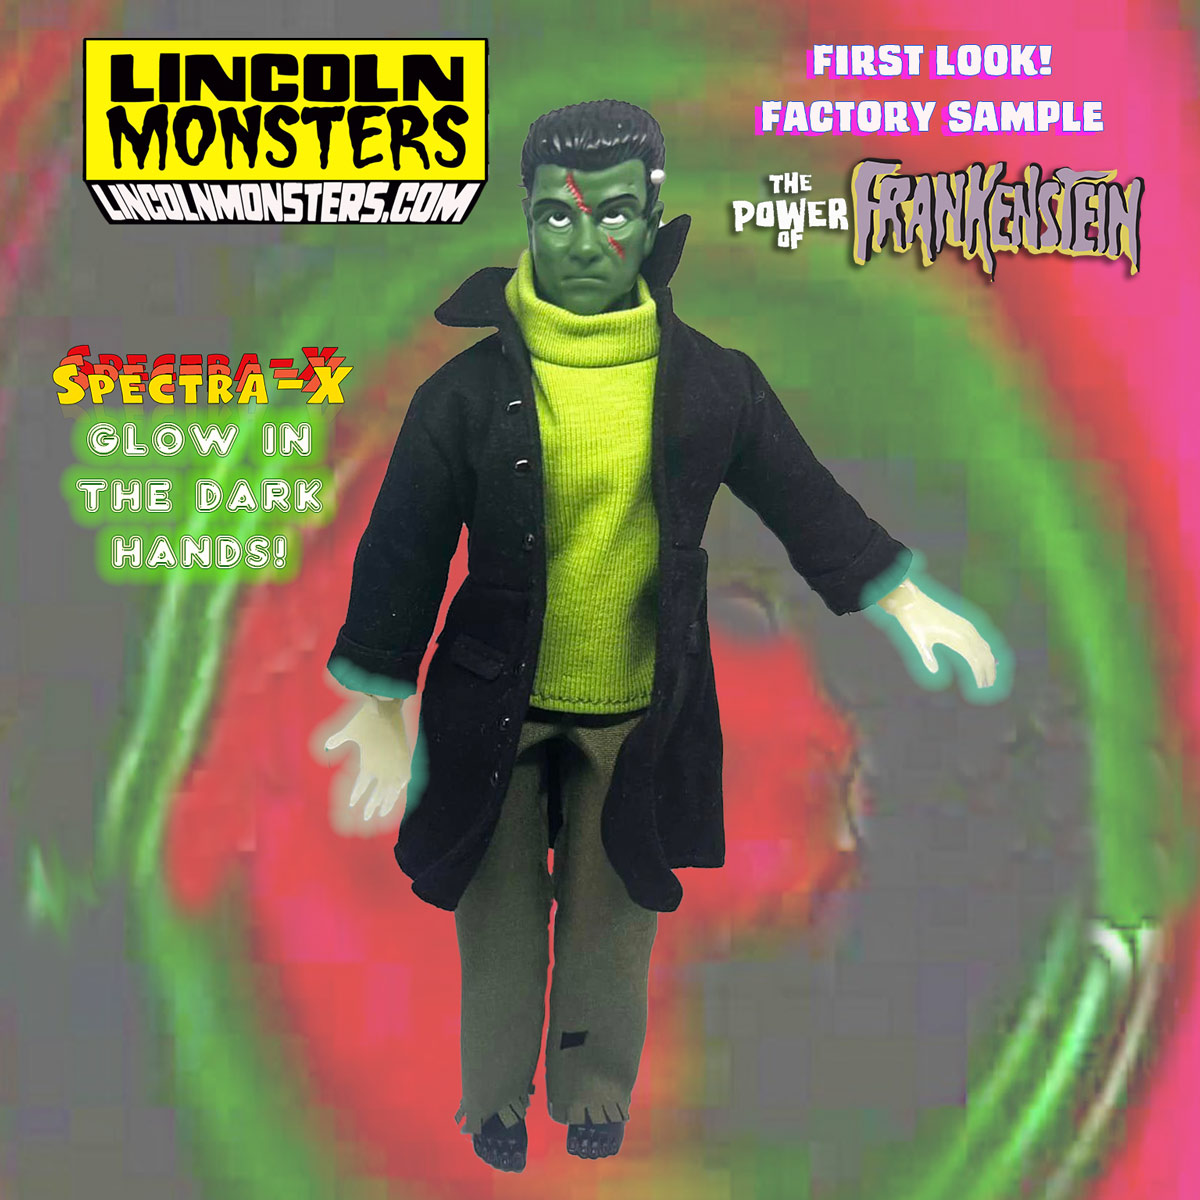 First Look at the Power of Frankenstein Factory Sample!